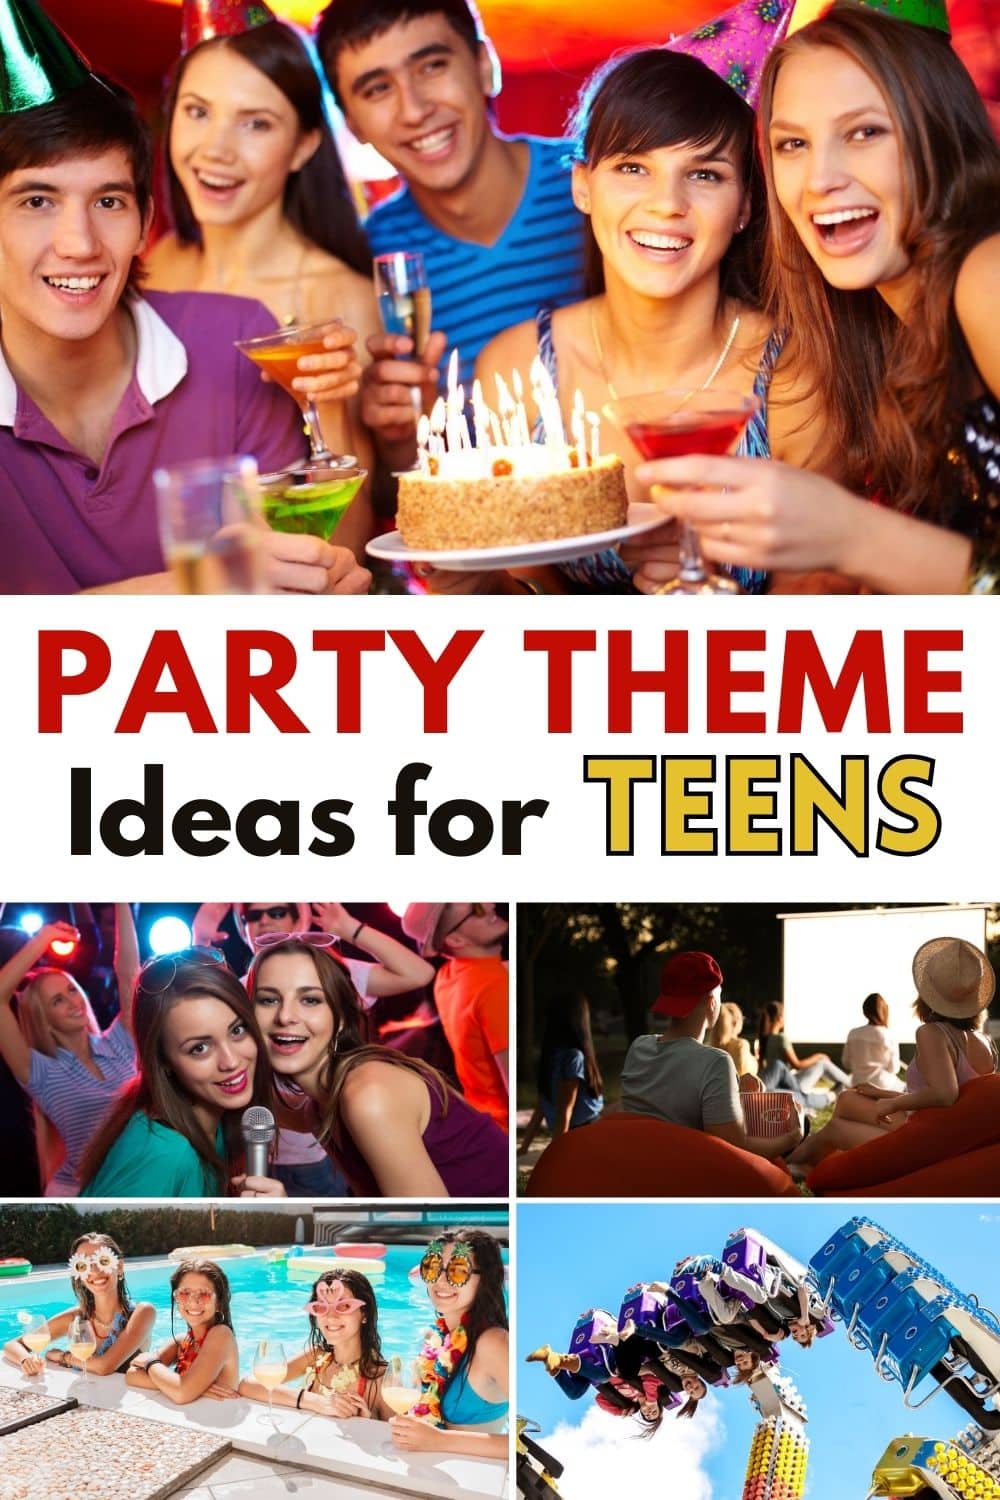 Teenagers are notorious for their love of parties and the desire for unique and exciting themes. If you're brainstorming  party theme ideas for teens, look no further! We have compiled a fabulous list